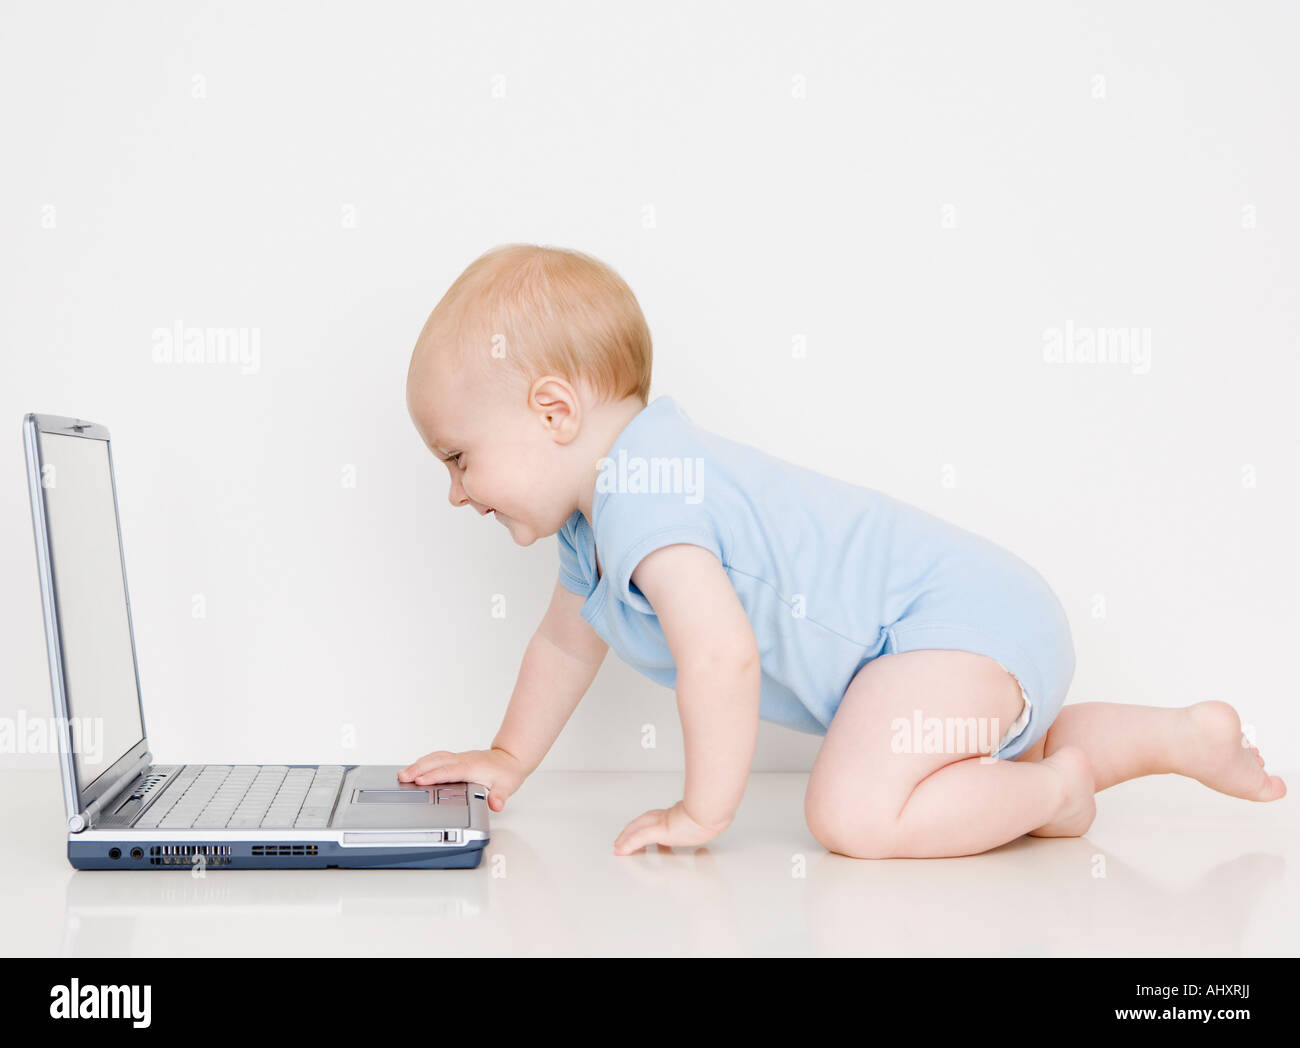 Baby looking at laptop Stock Photo